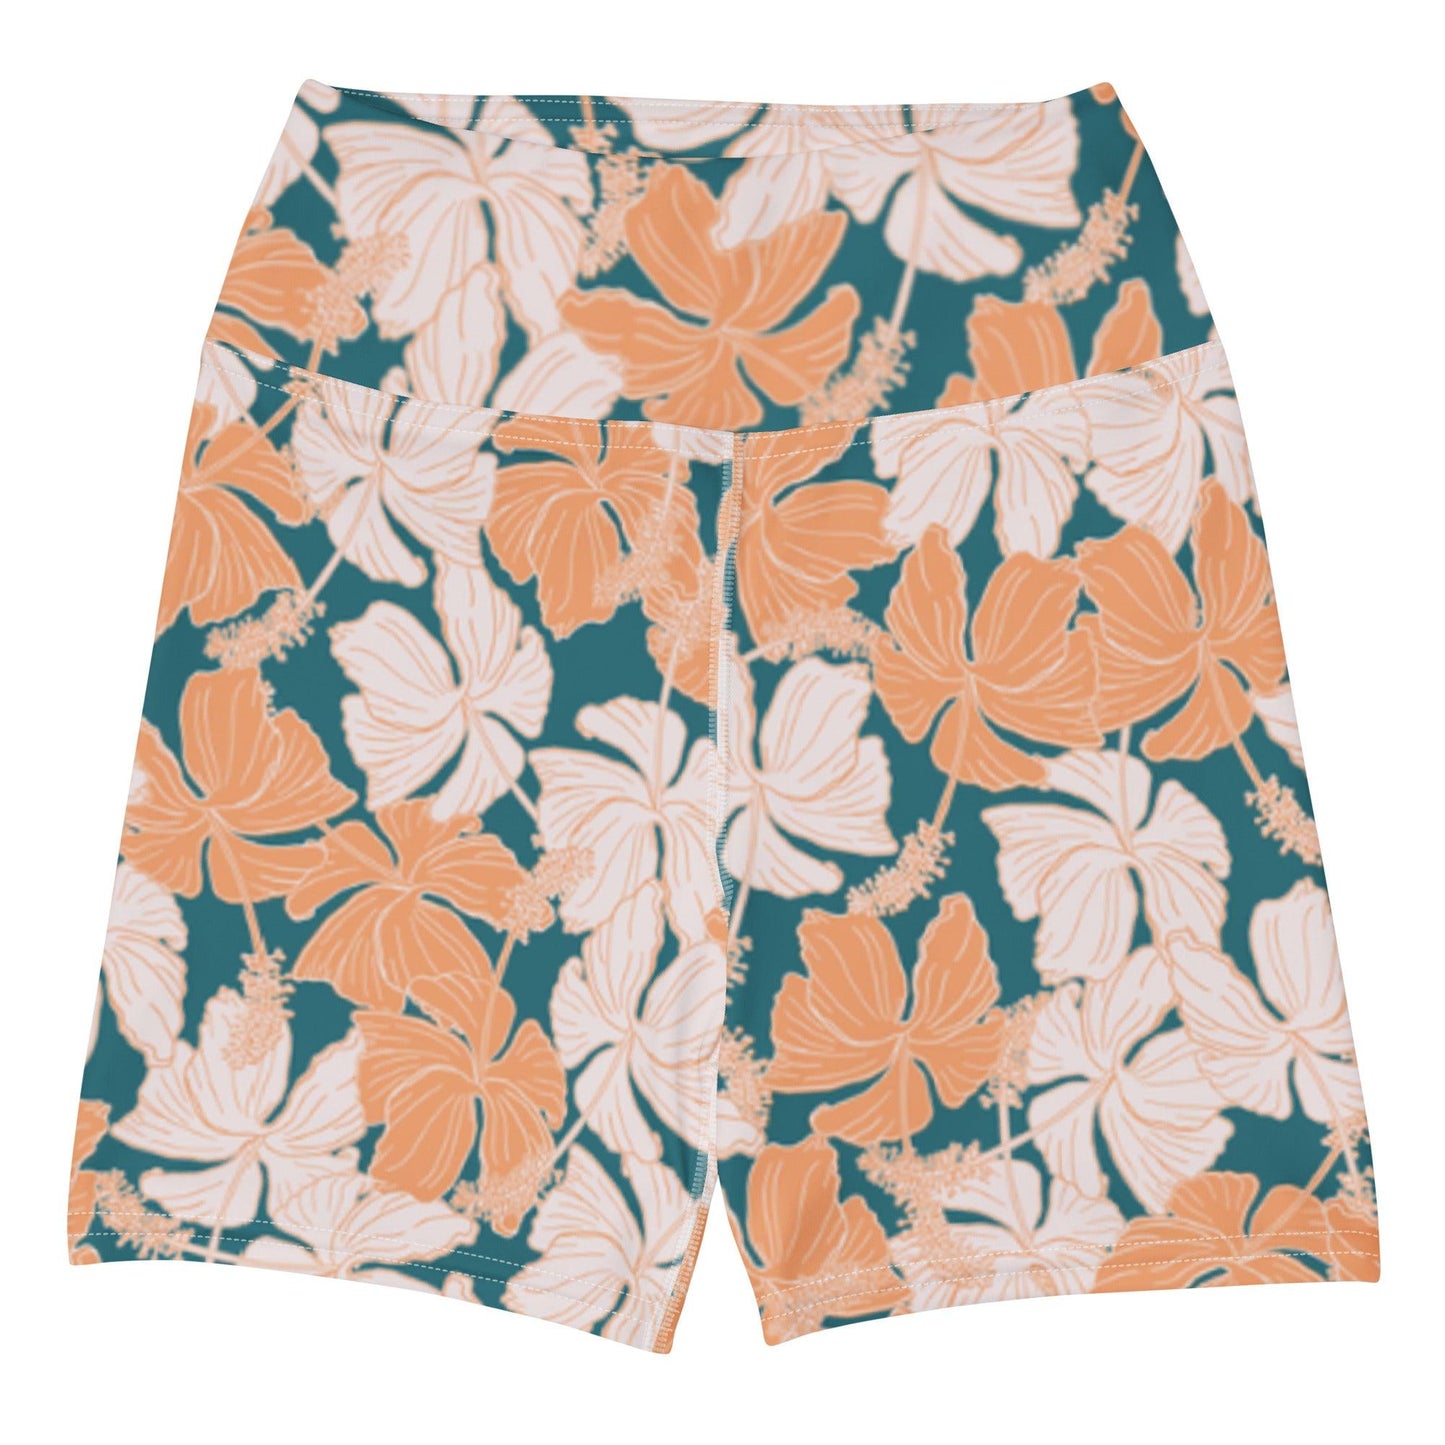 Vintage Hibiscus in Coral/Turquoise High Waisted Shorts - Solshine and Co